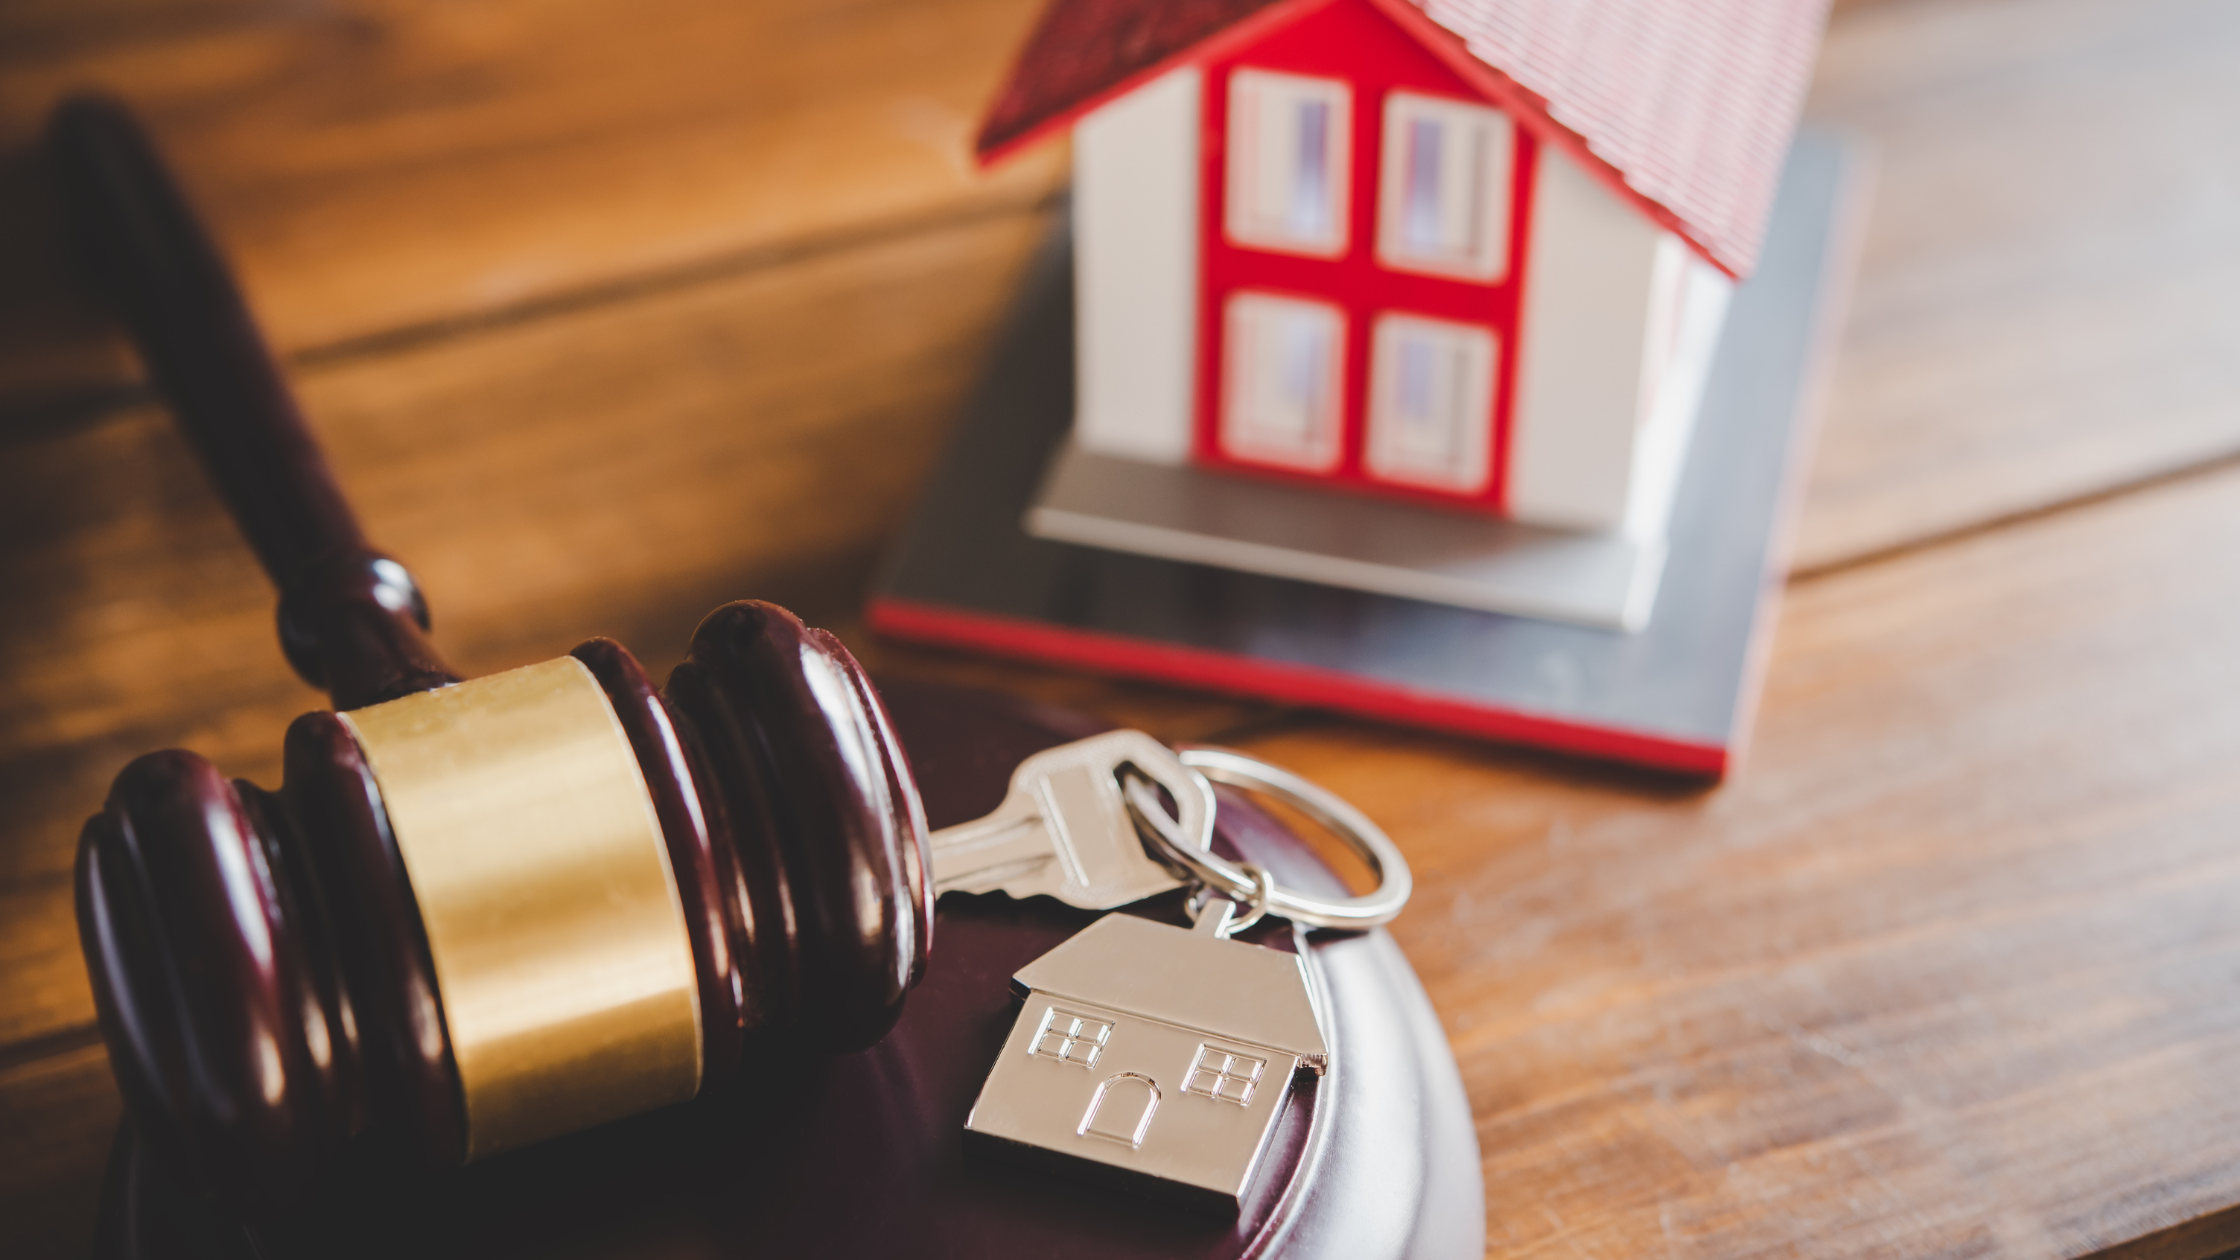 An auction gavel lies next to a set of silver keys with a red and white house in the background.